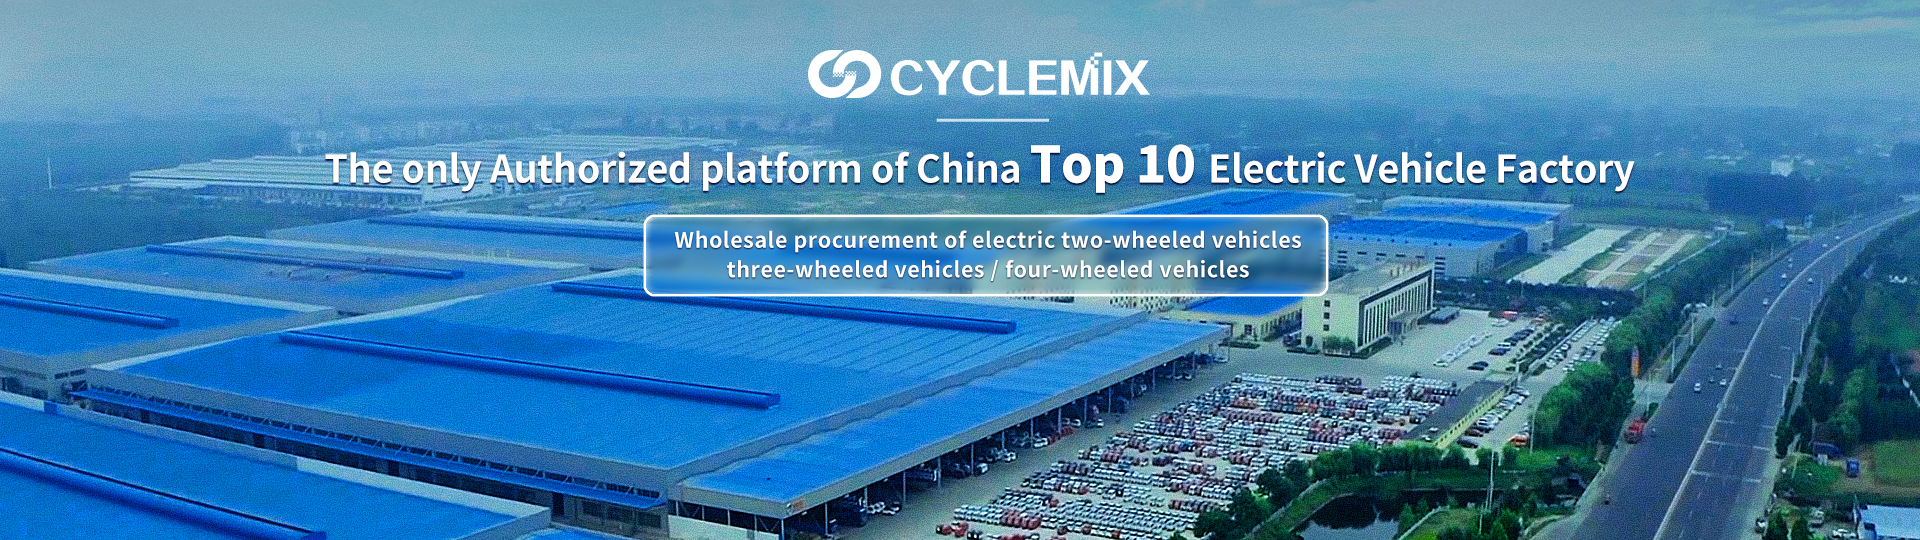 CYCLEMIX The only authorized party / platform of China Top 10 Electric Vehicle Factory